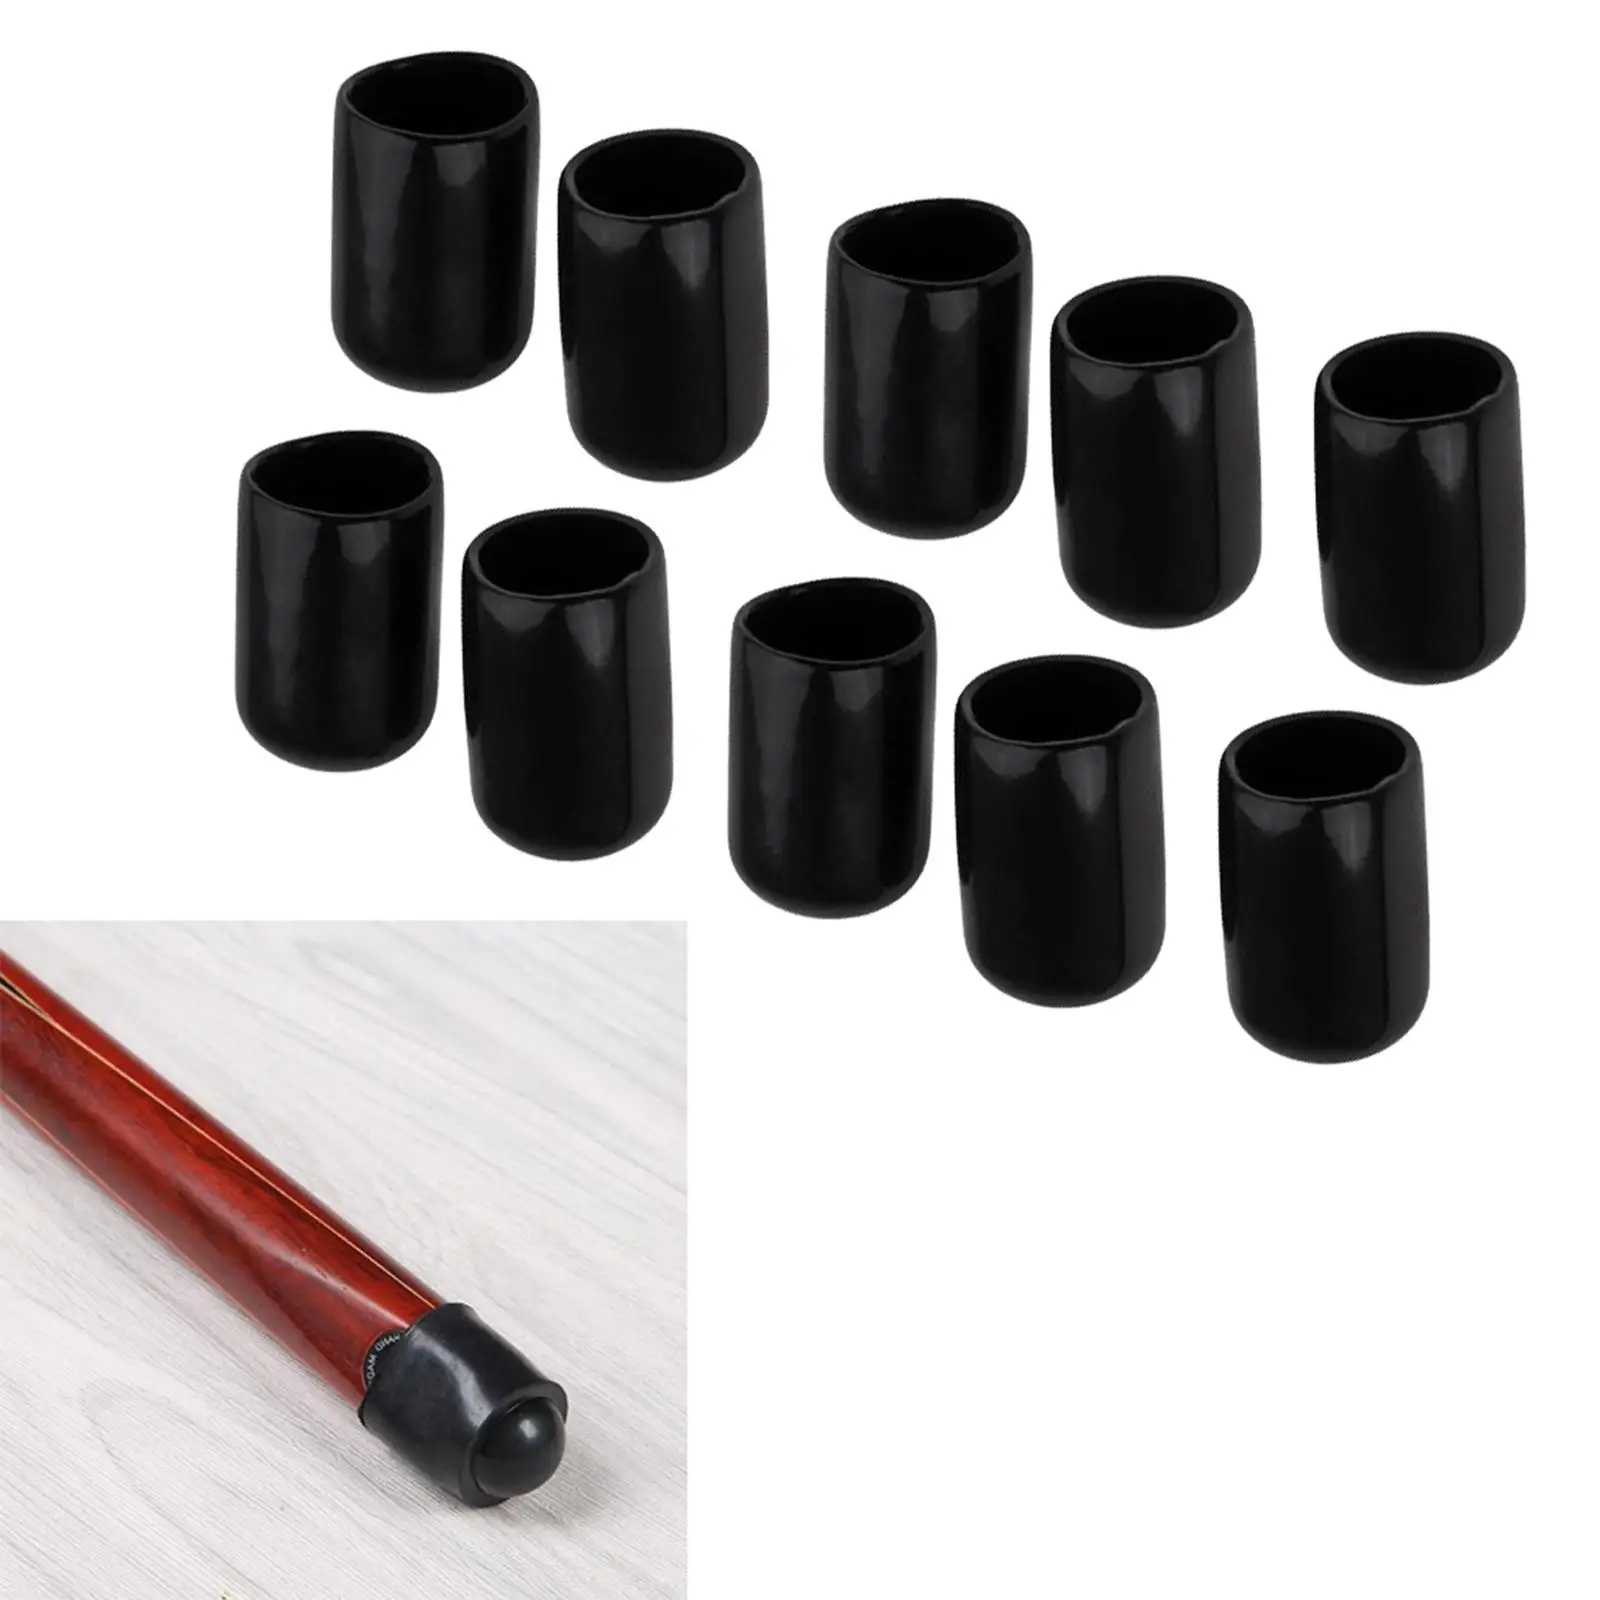 10x Pool Cue Tips Hat Replacement Durable Moistureproof Black 10mm Billiards